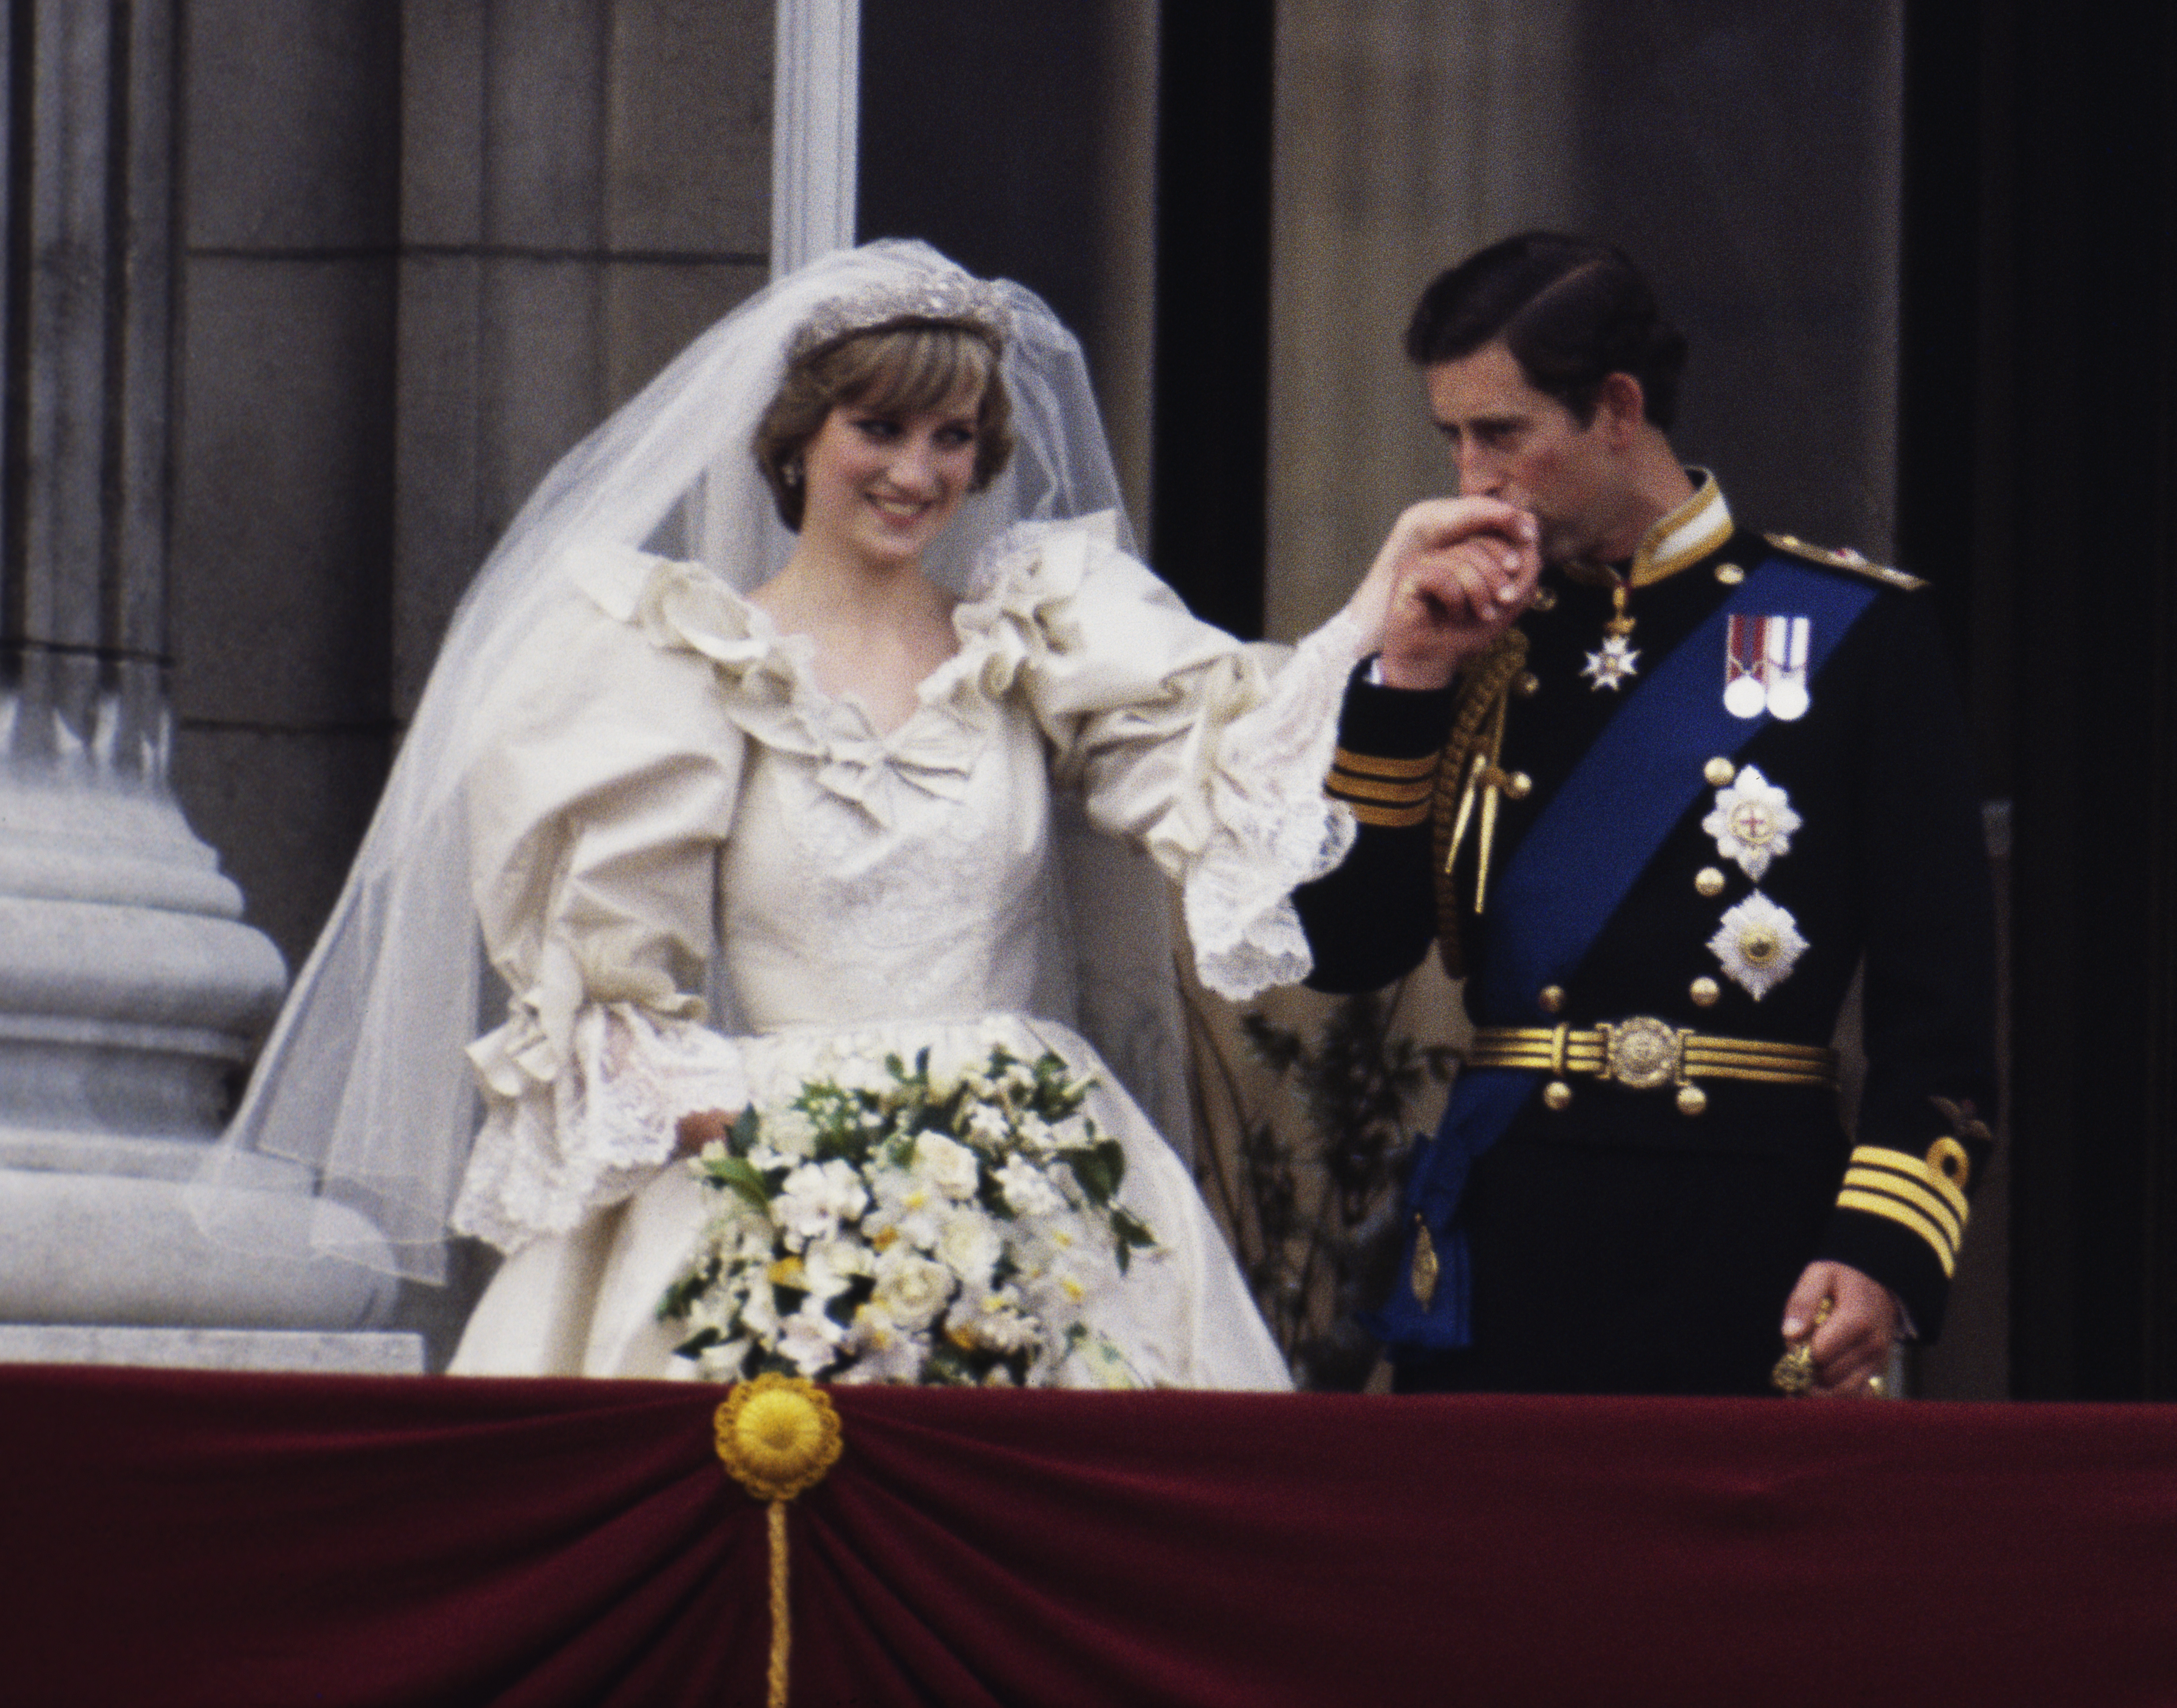 Princess Diana and King Charles III on their wedding day in London, England on July 29, 1981 | Source: Getty Images